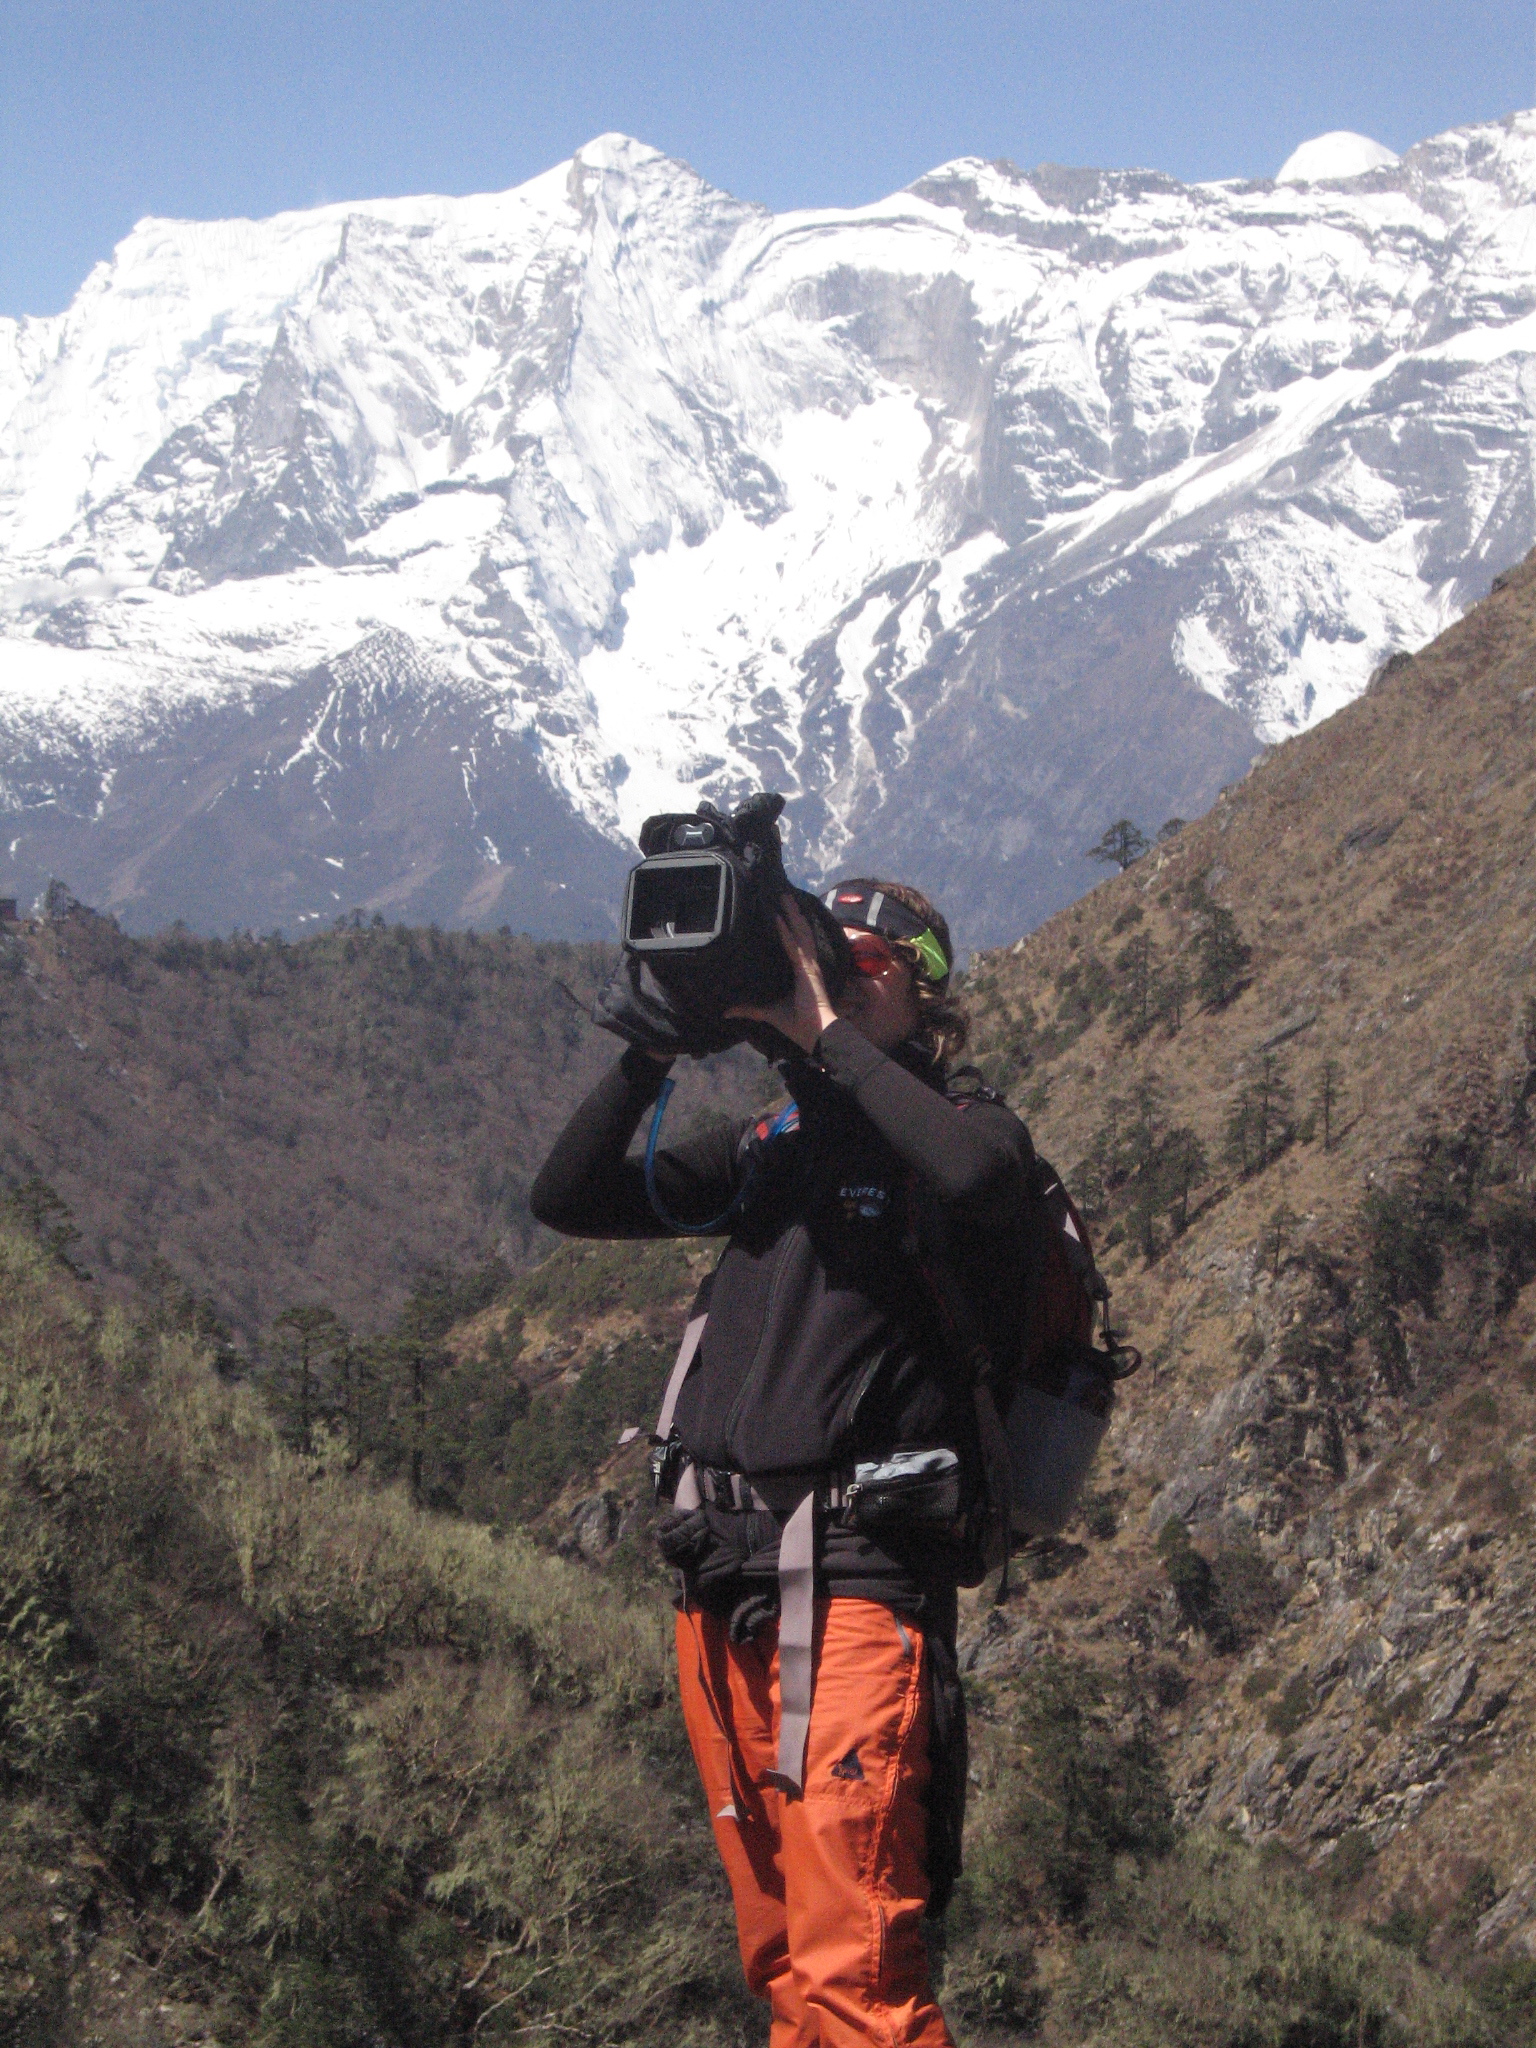 Jen Heck shooting in Nepal on a research trip for the upcoming feature film 